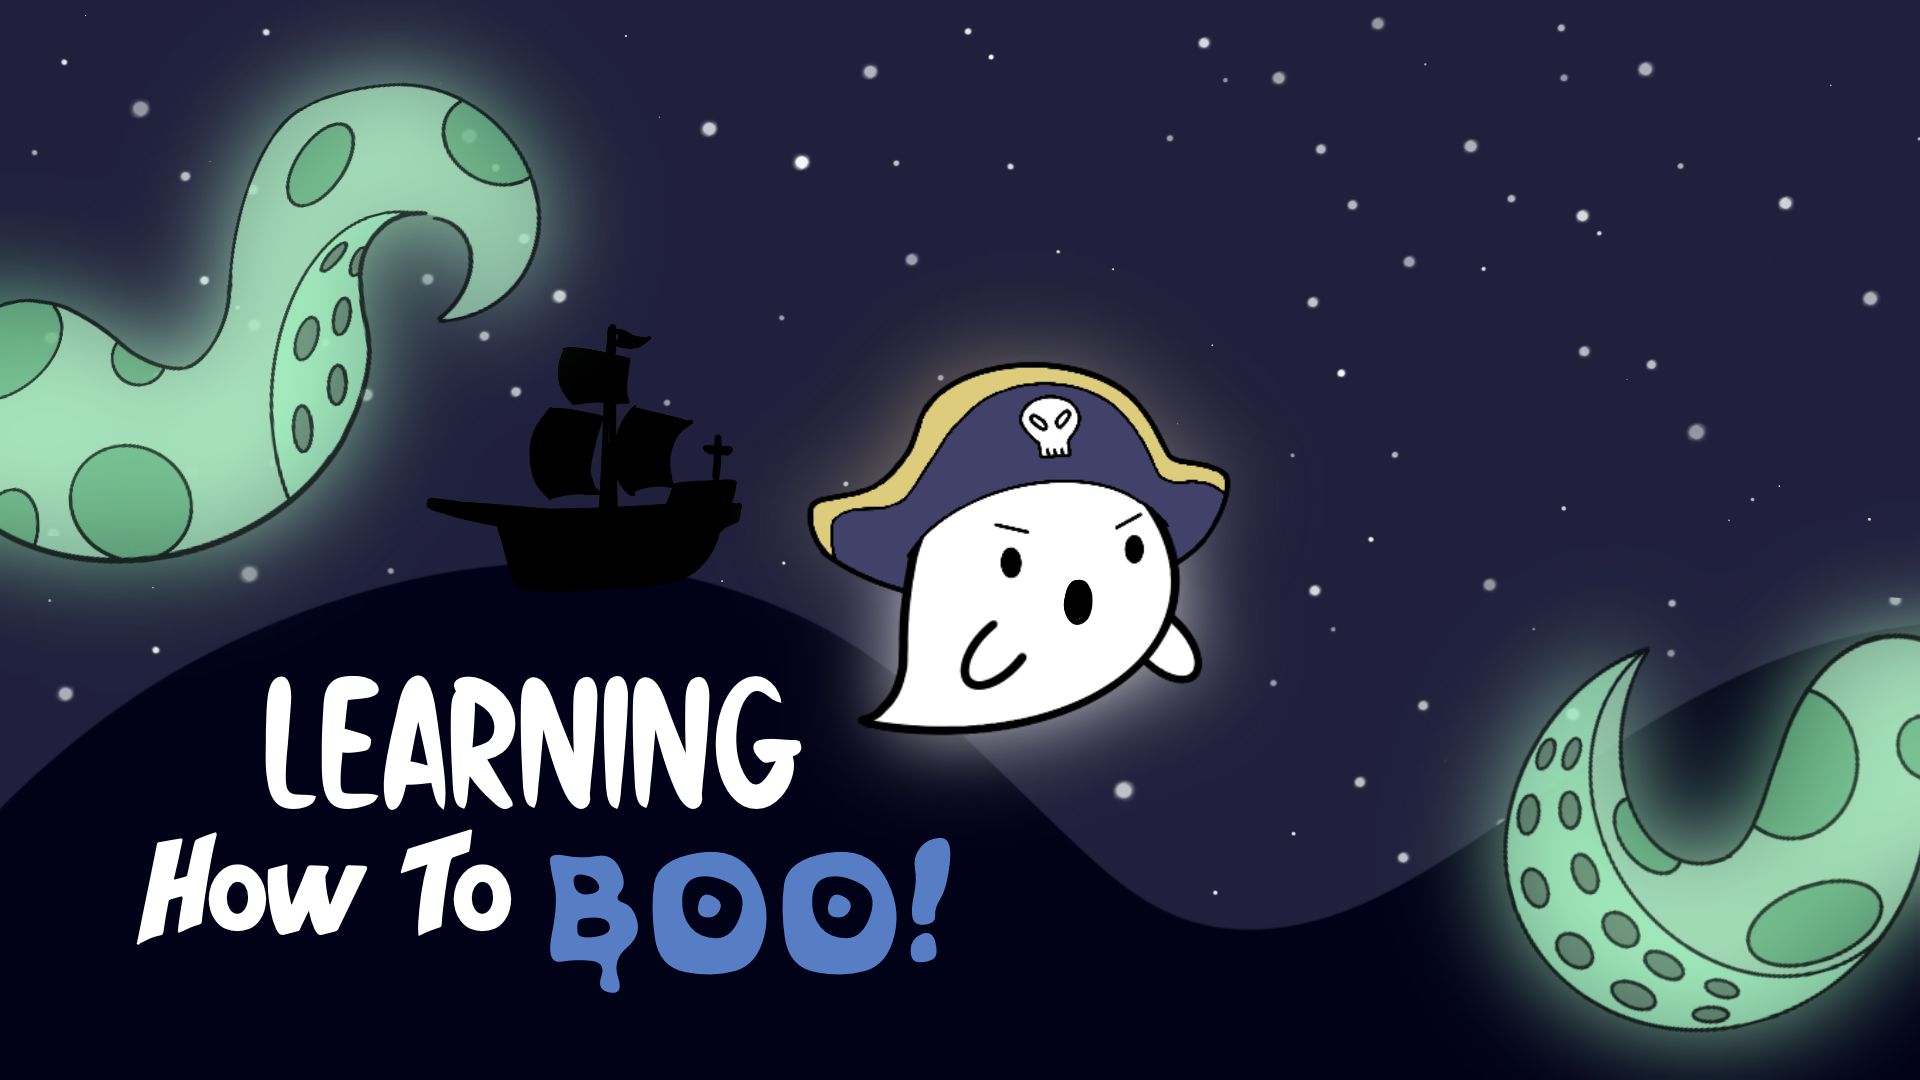 Learning how to Boo!